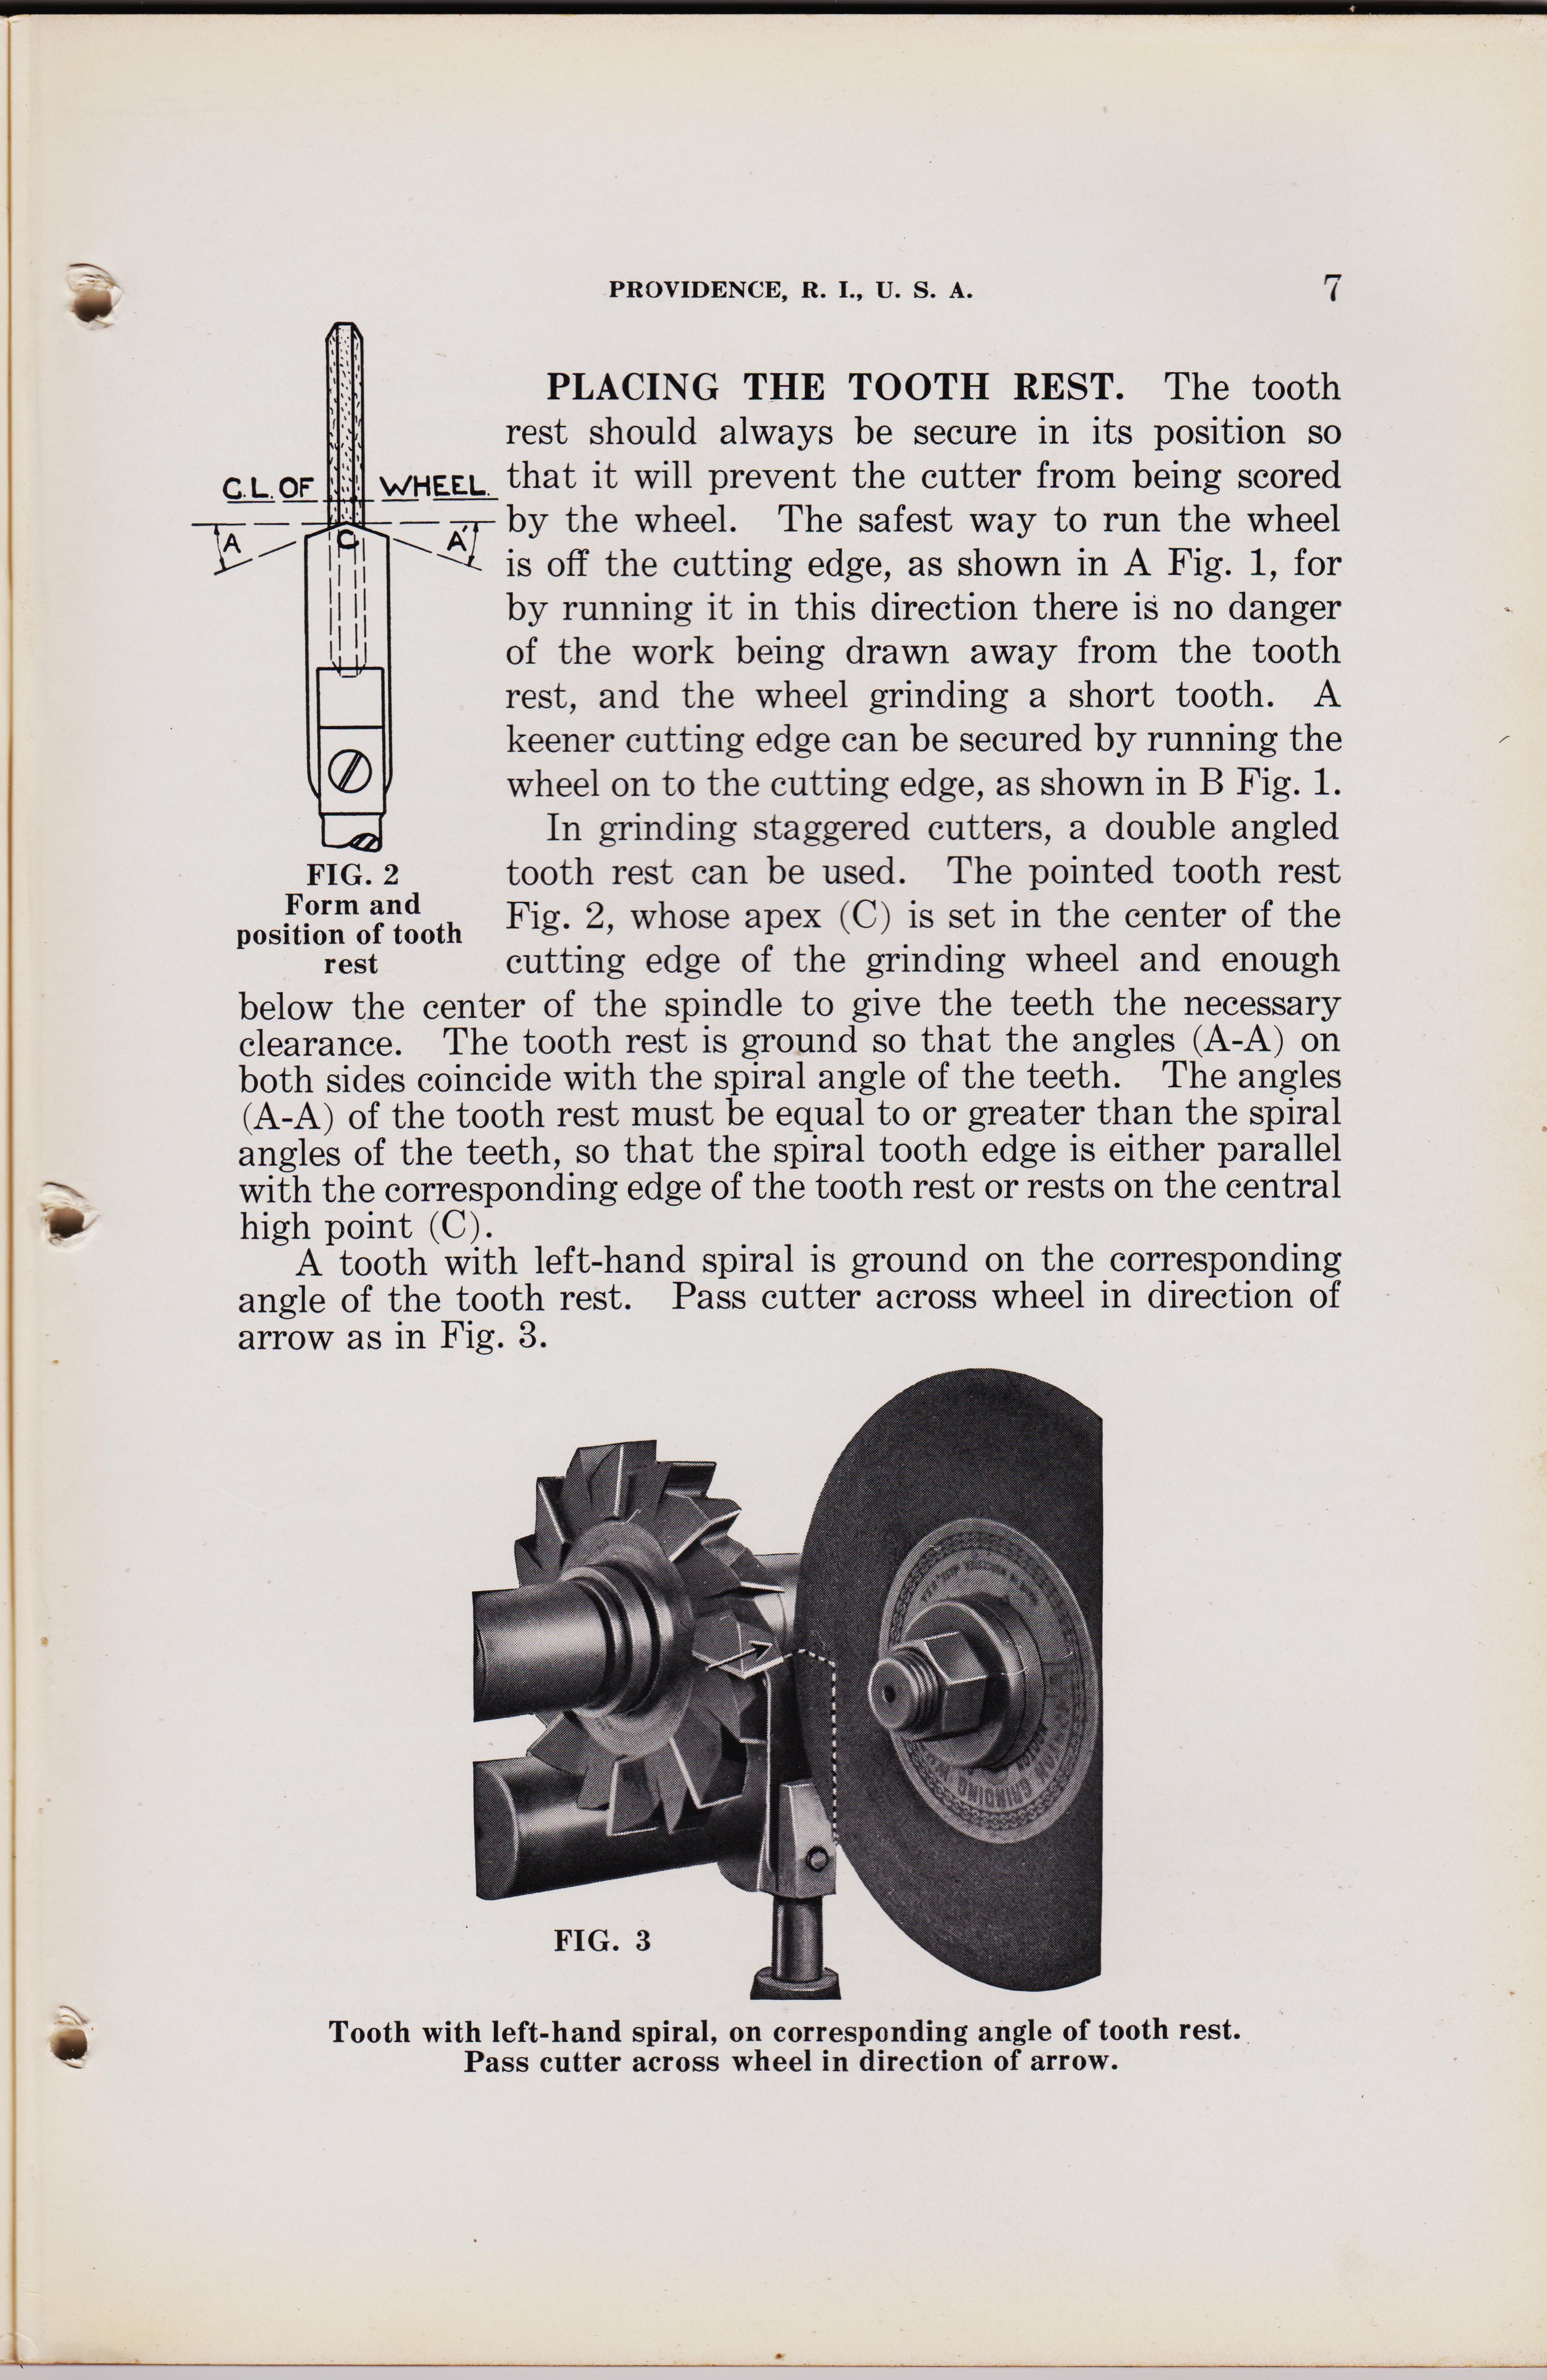 https://antiquemachinery.com/images-2020/Universal-Cutter-and-Reamer-Grinder-Machine-Brown-and-Sharpe-Mfg-Co-1929-No2-No3-pg-7.jpg